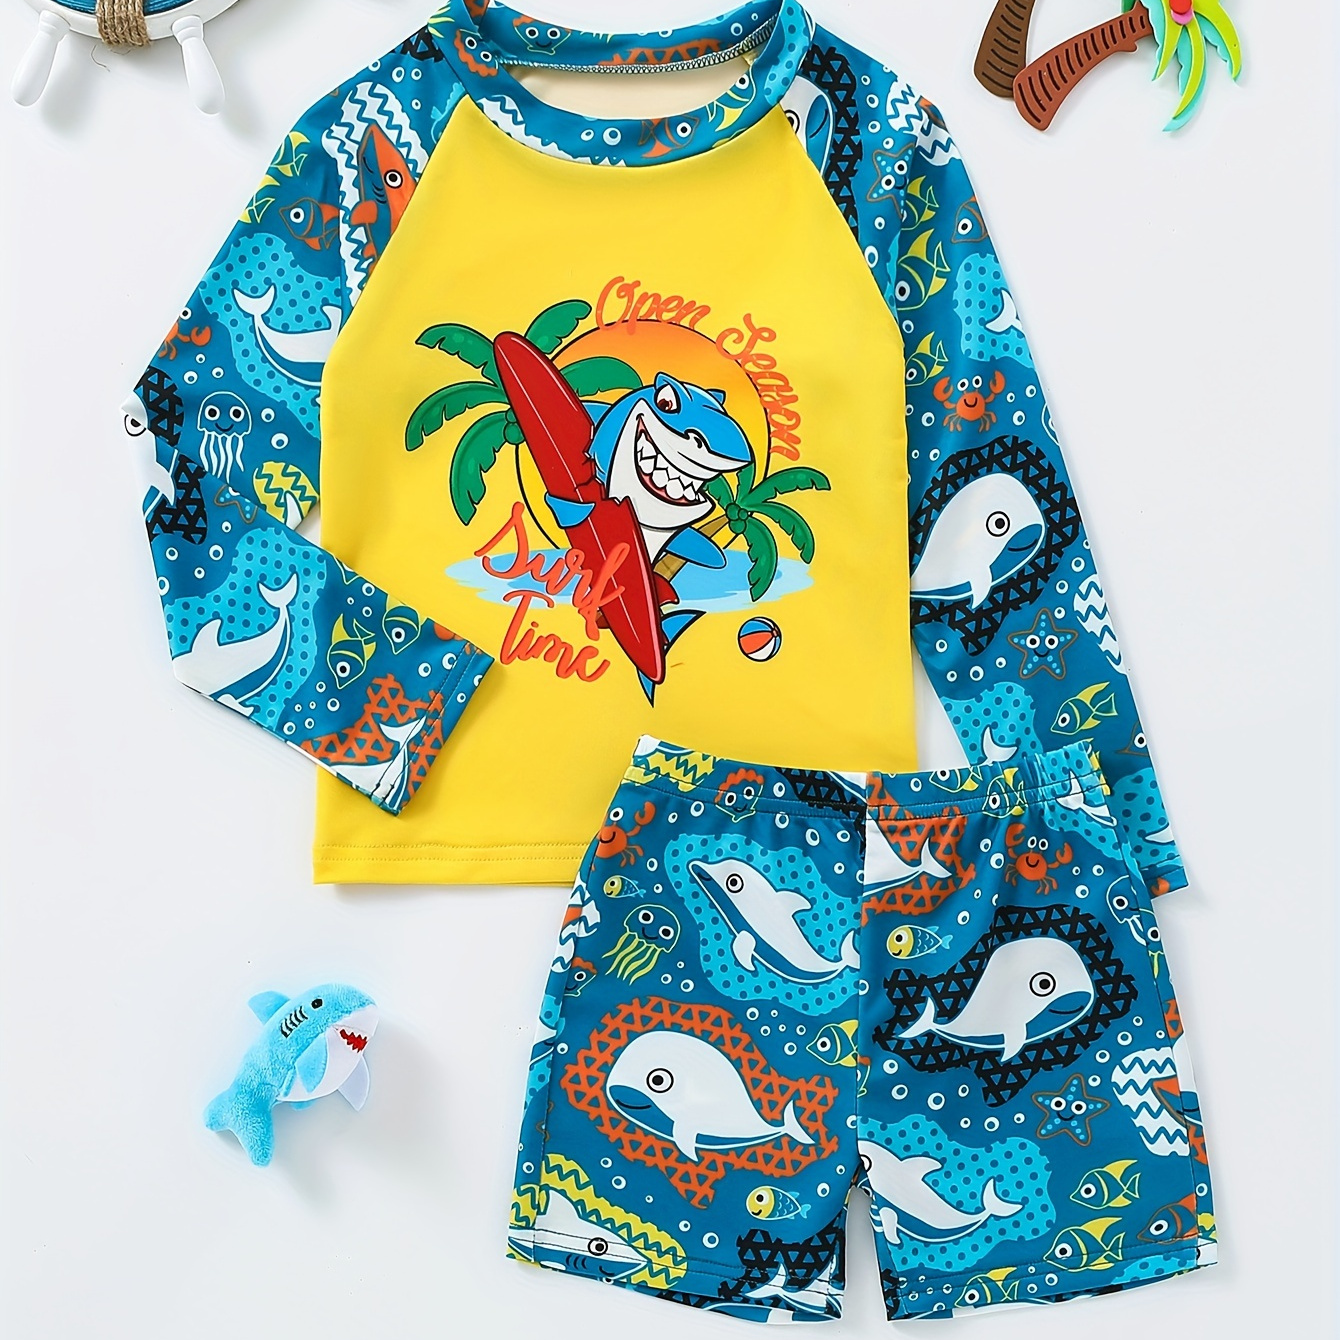 

2pcs Cartoon Shark And Whale Pattern Swimsuit For Boys, Long Sleeve T-shirt & Swim Trunks Set, Stretchy Surfing Suit, Boys Swimwear For Summer Beach Vacation